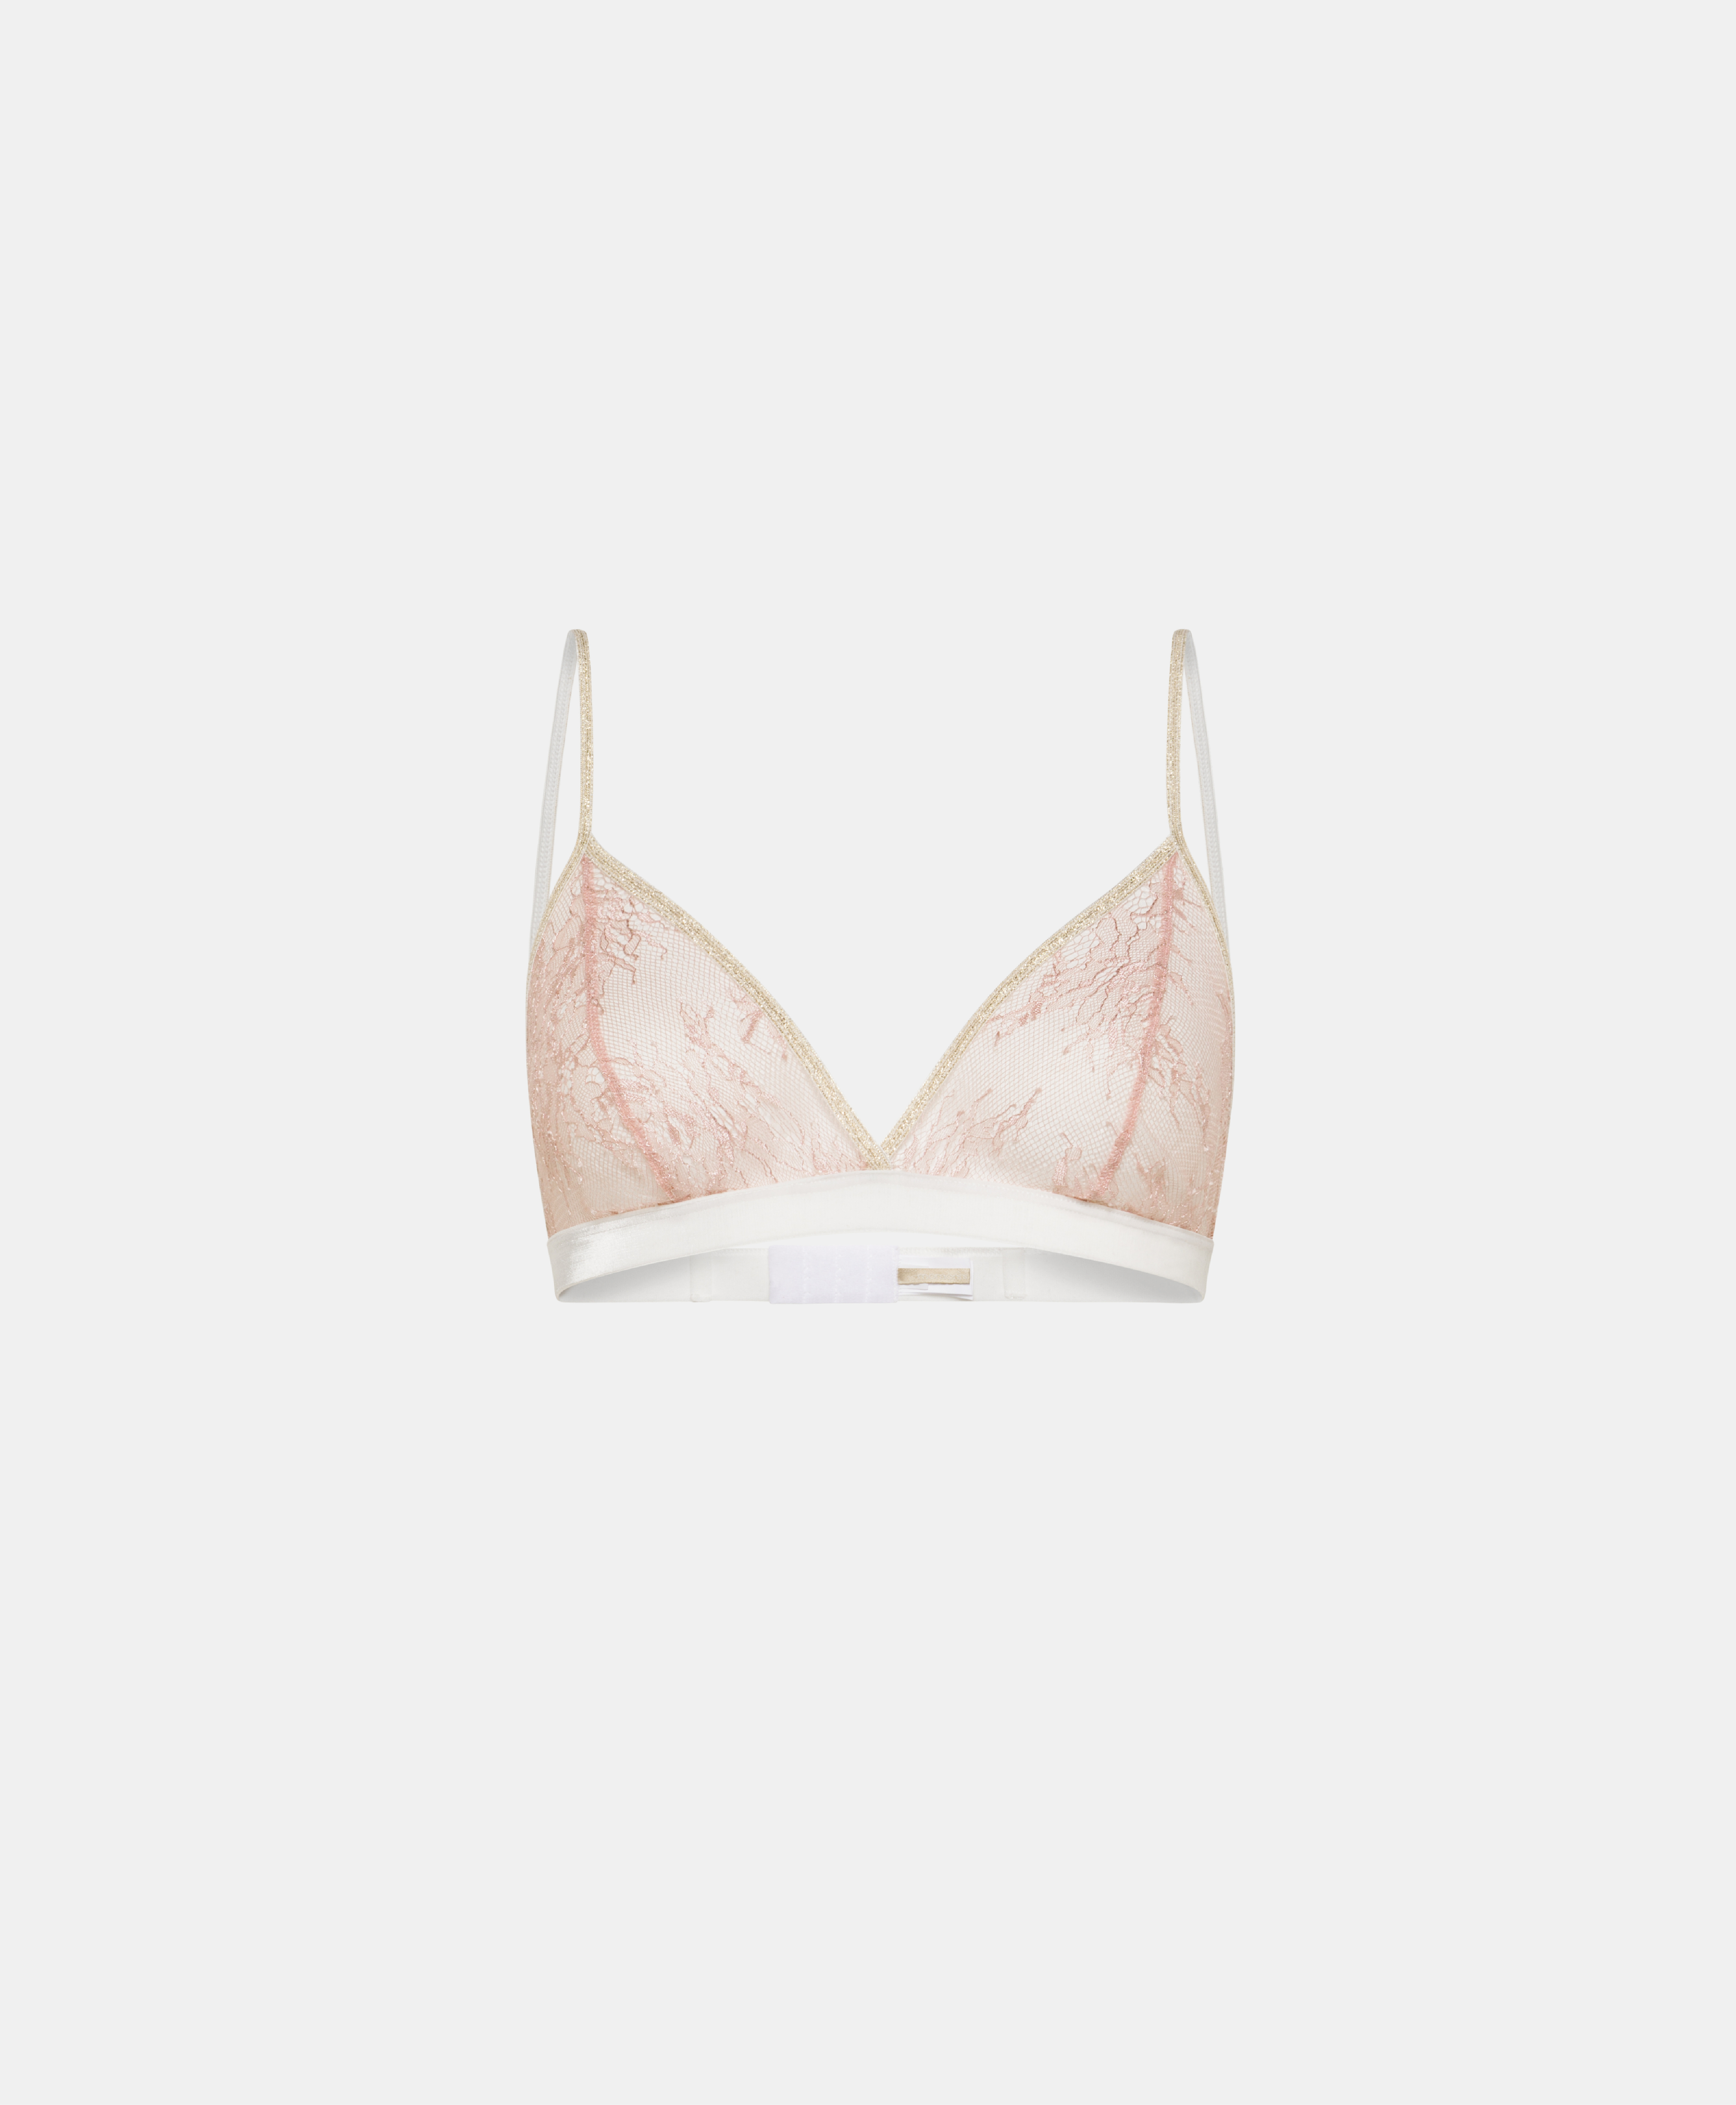 AZAMI BRA IN LACE WITH UNDERBAND - PINK - Momonì